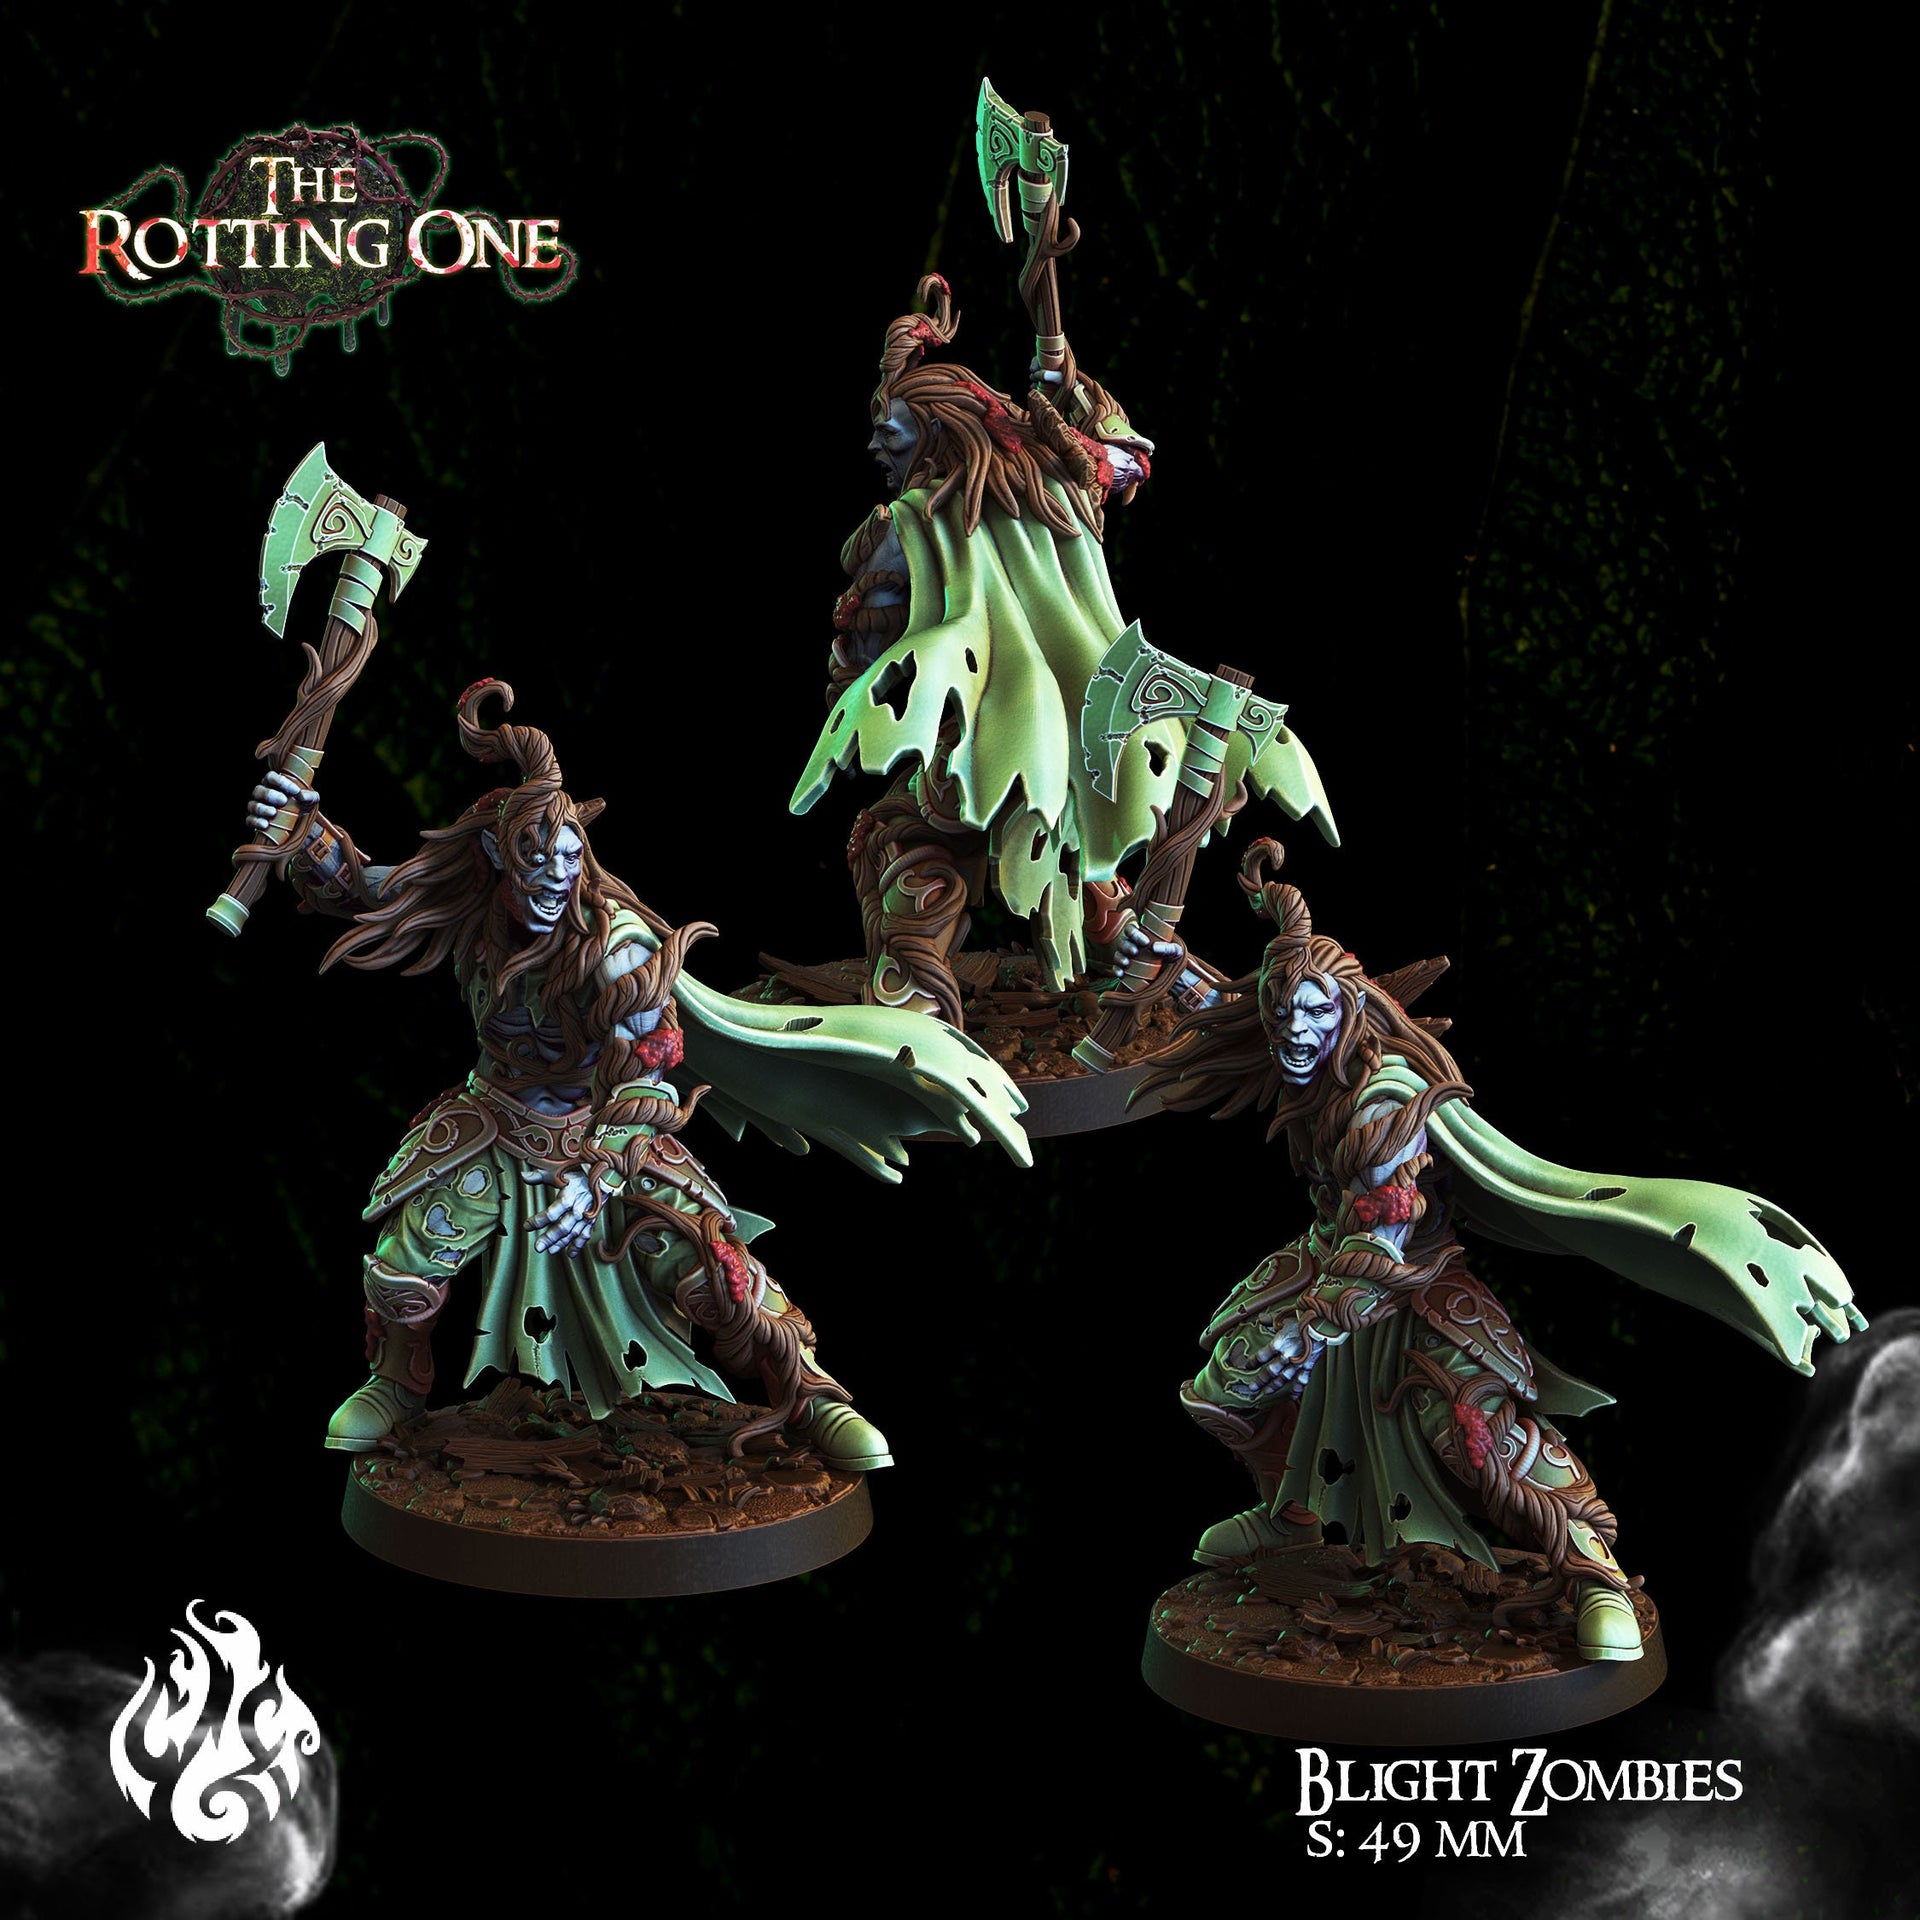 Blight Zombies - Crippled God Foundry - The Rotting One 